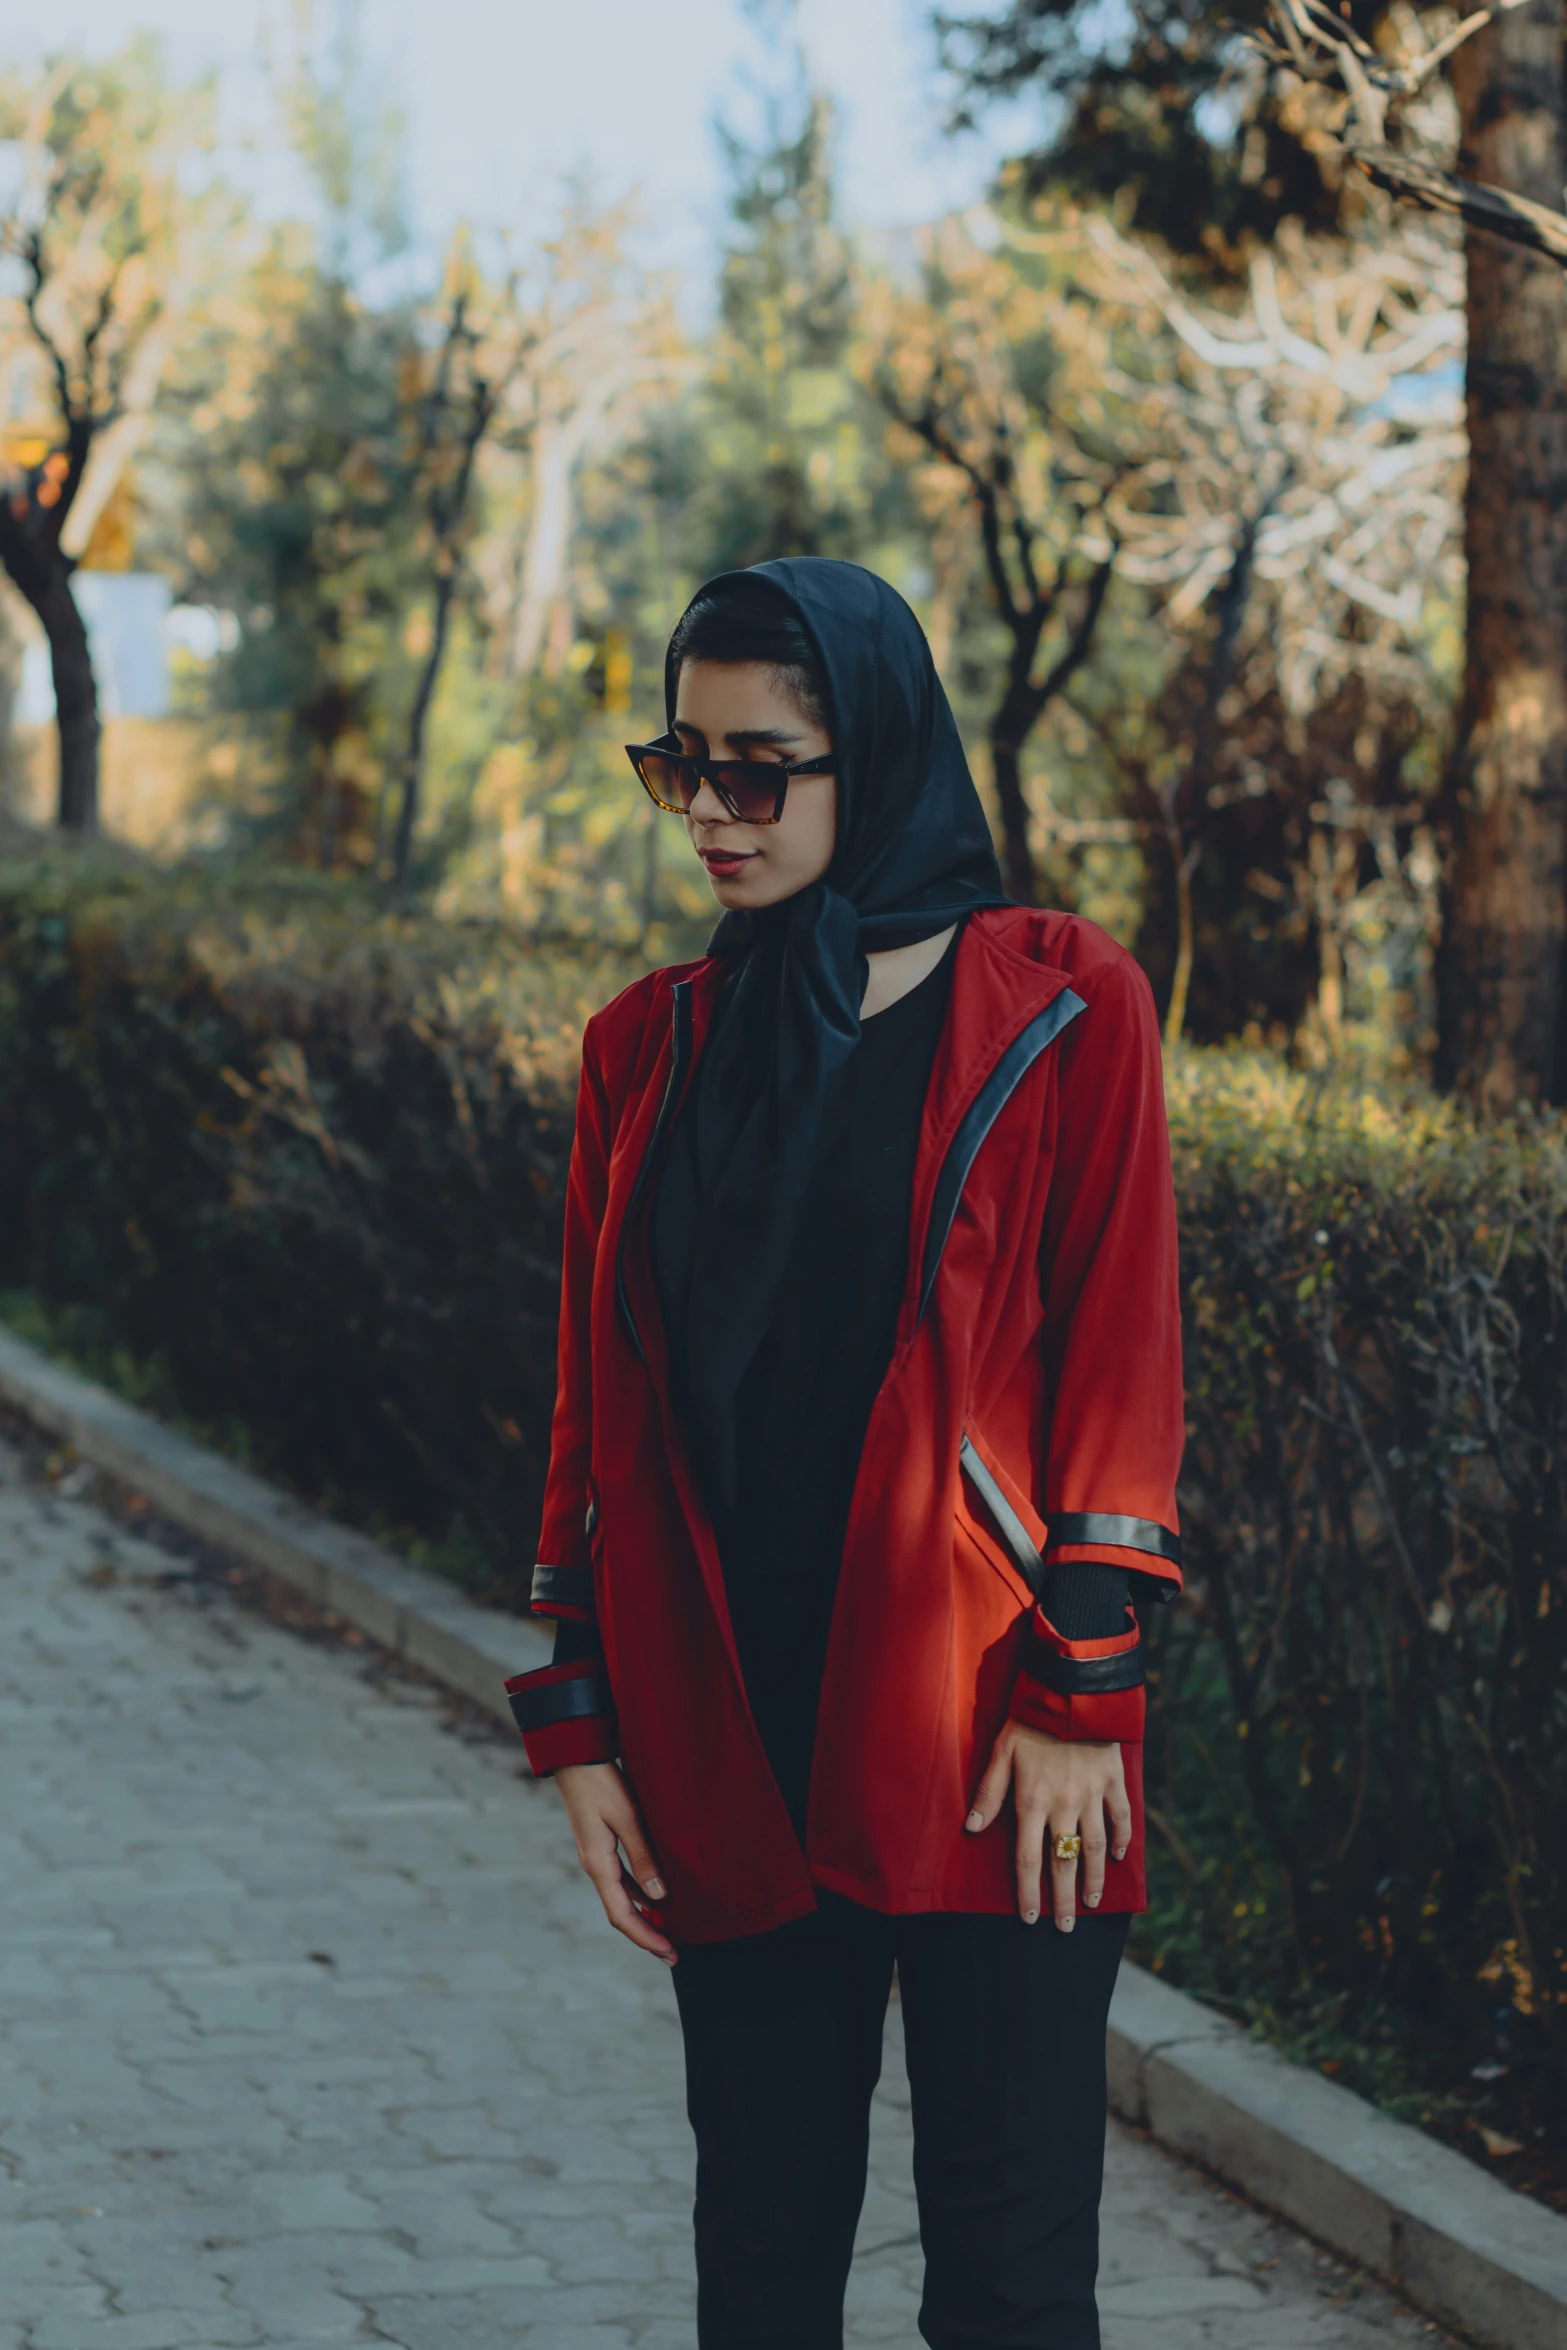 a woman is wearing sunglasses, and she is wearing a red jacket